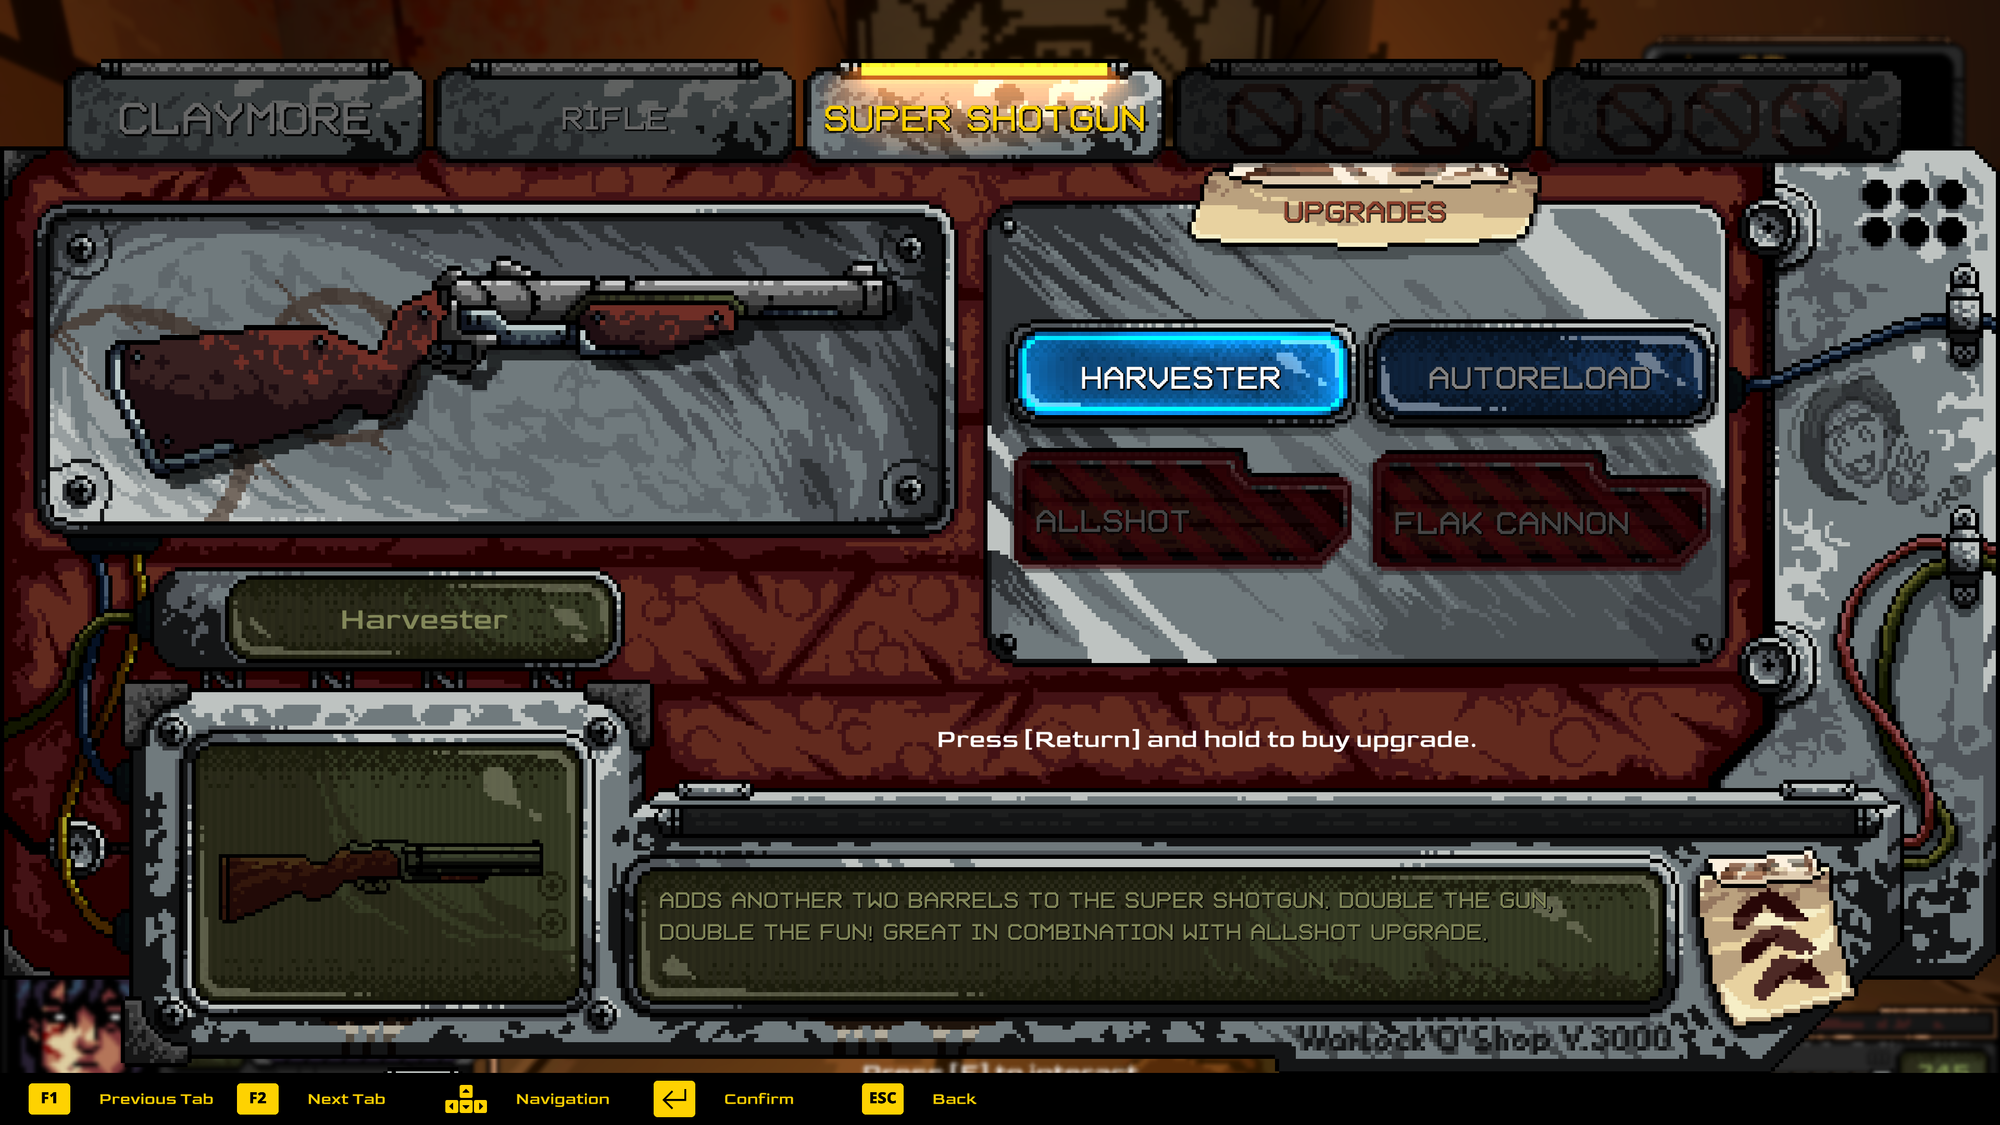 Project Warlock 2's upgrade screen, showcasing the options for shotgun upgrades.